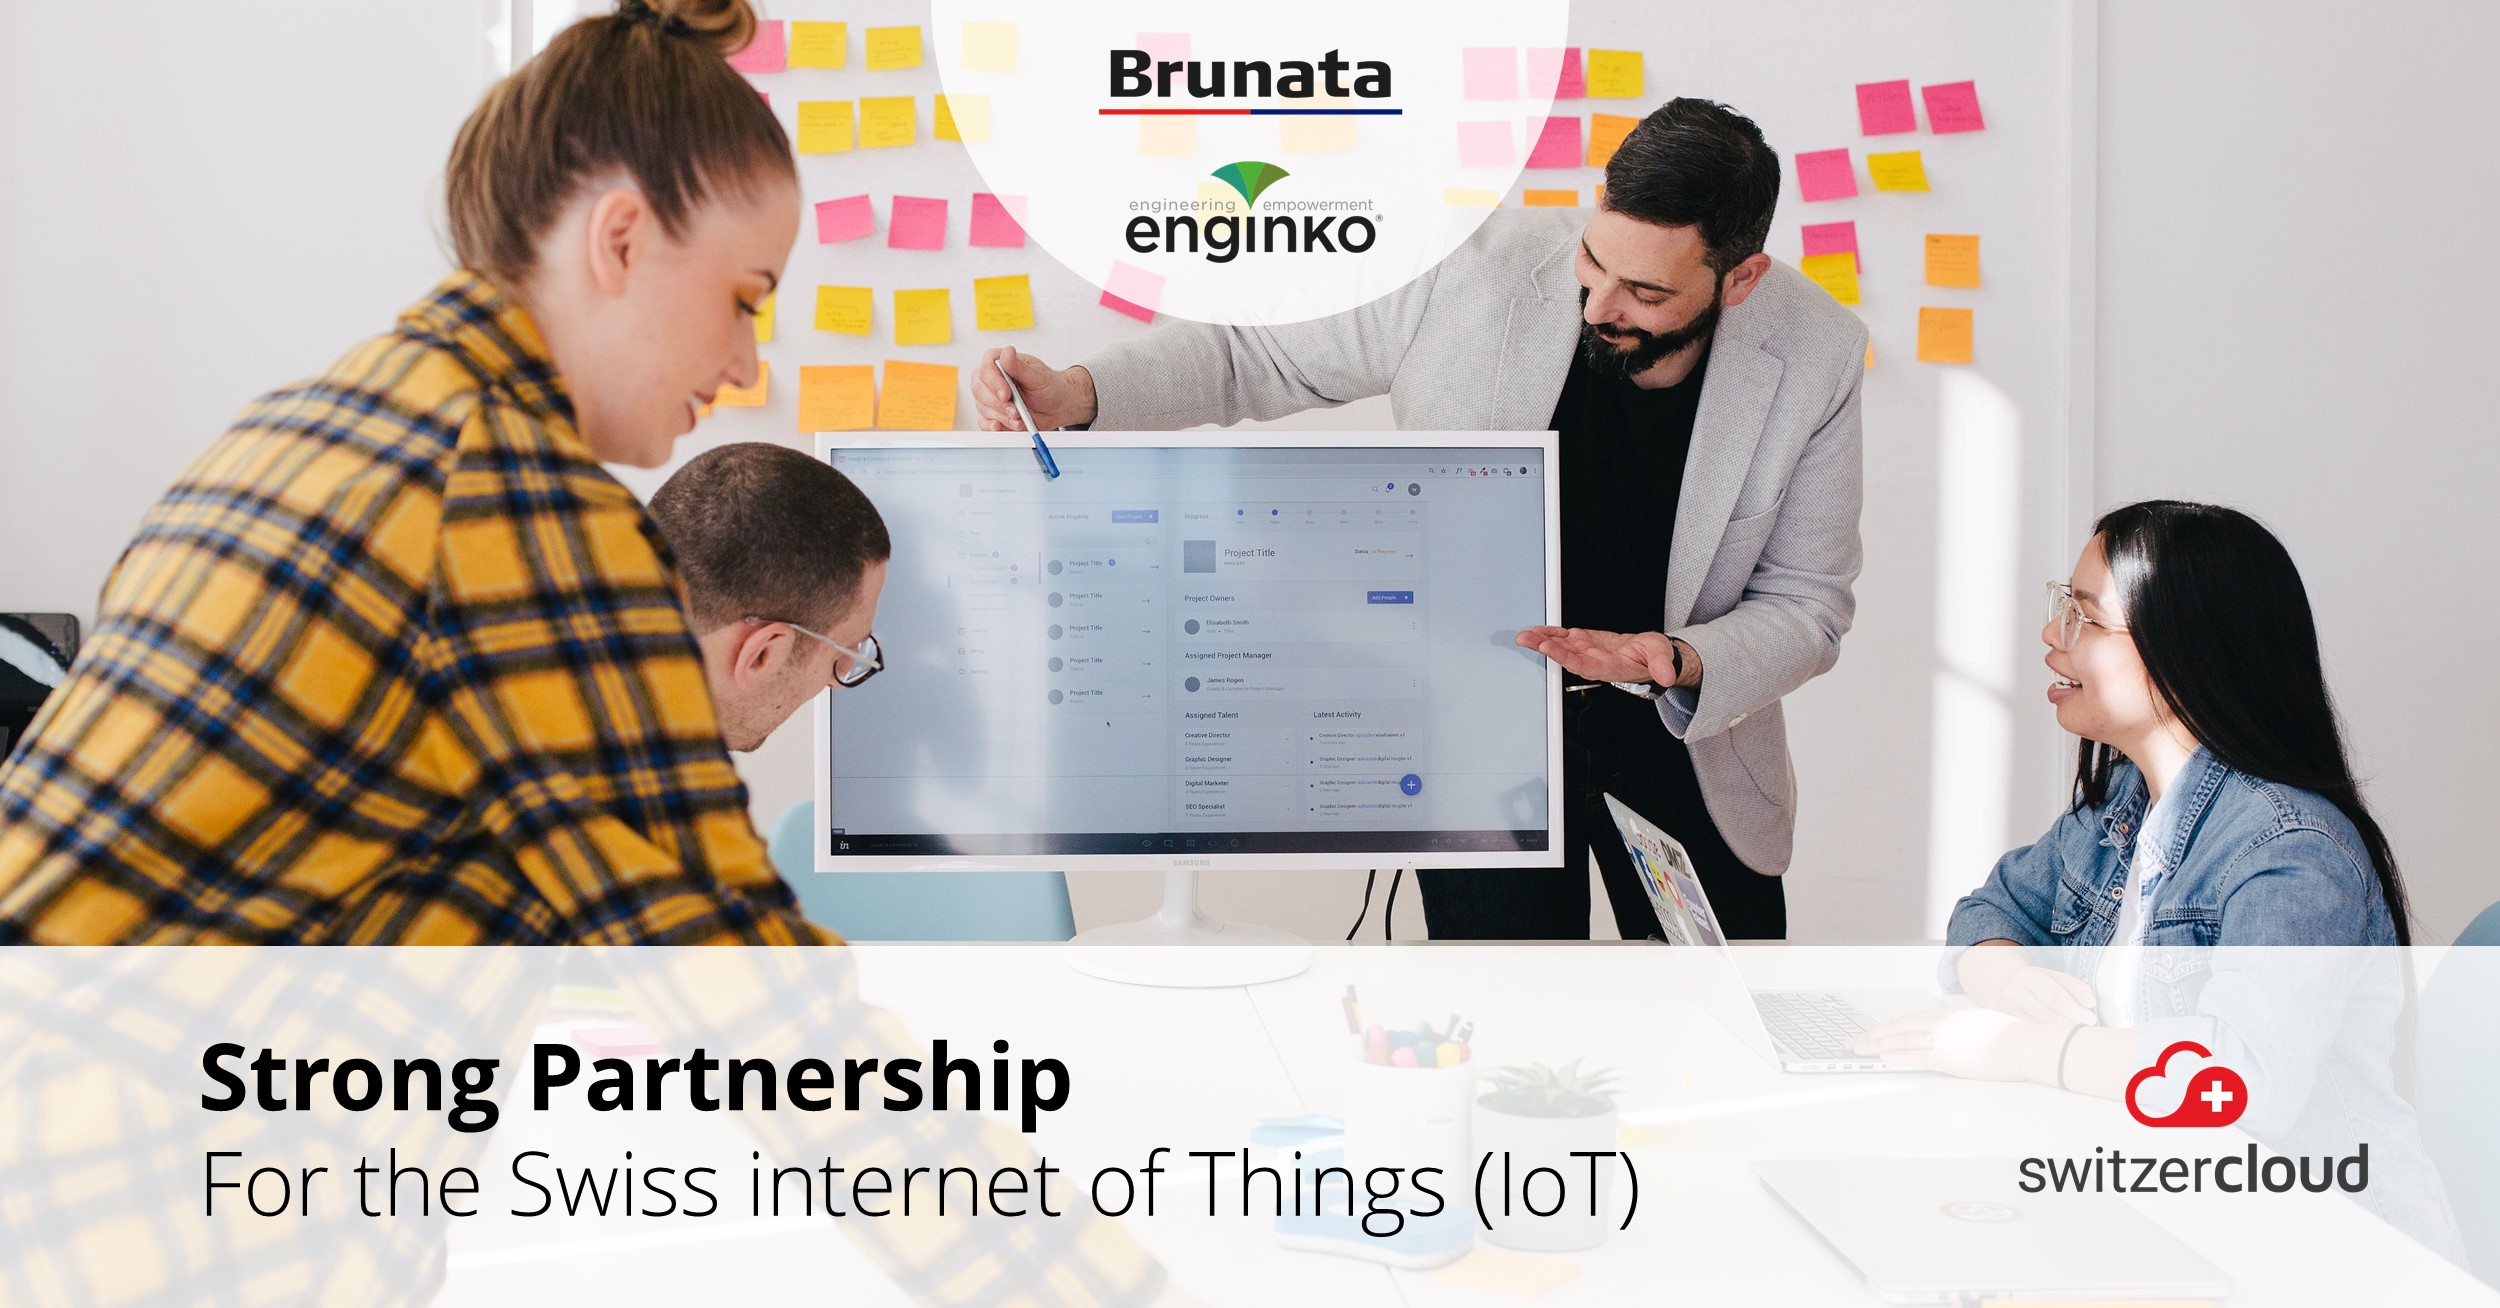 Enginko and Brunata simplify Indoor Climate with IoT